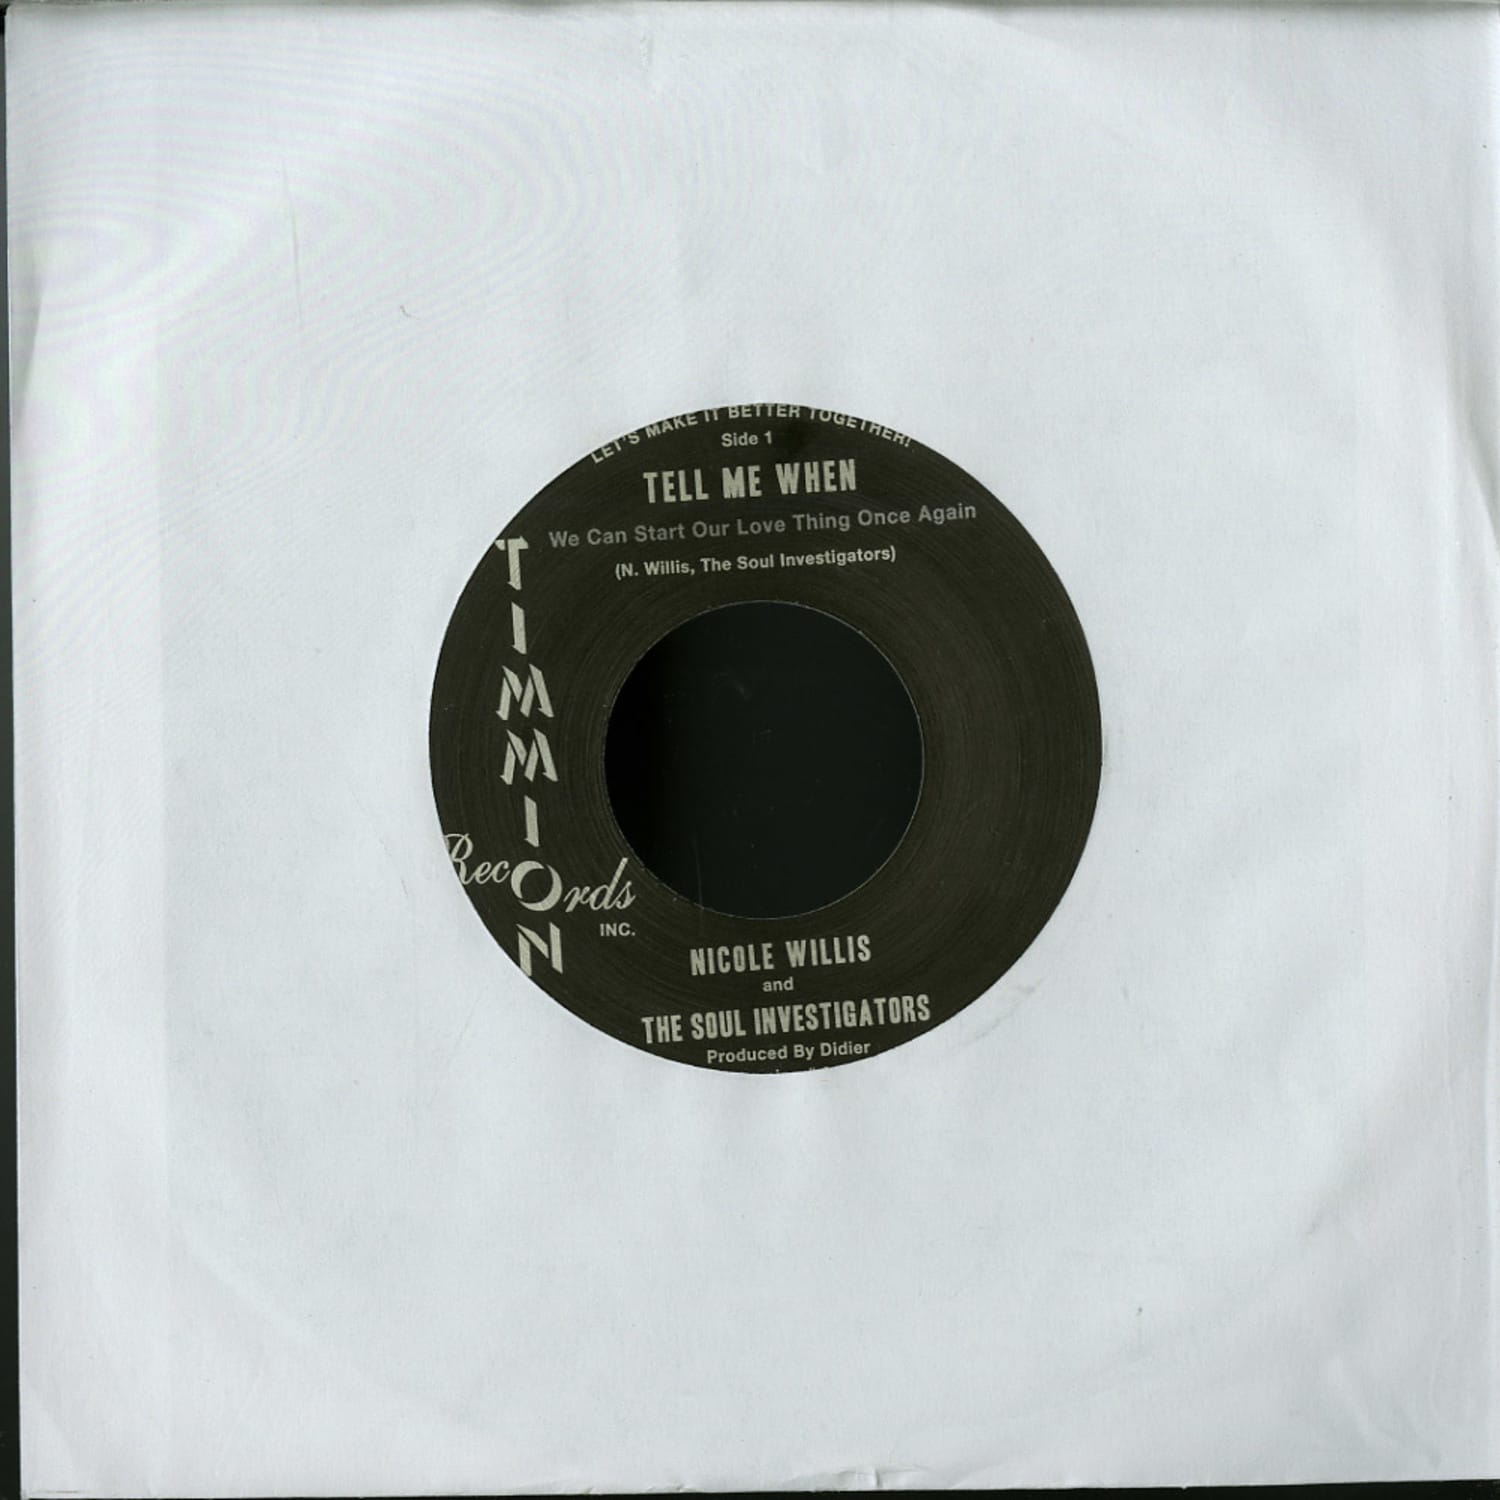 Nicole Willis & The Soul Investigators - TELL ME WHEN / IT S ALL BECAUSE OF YOU 